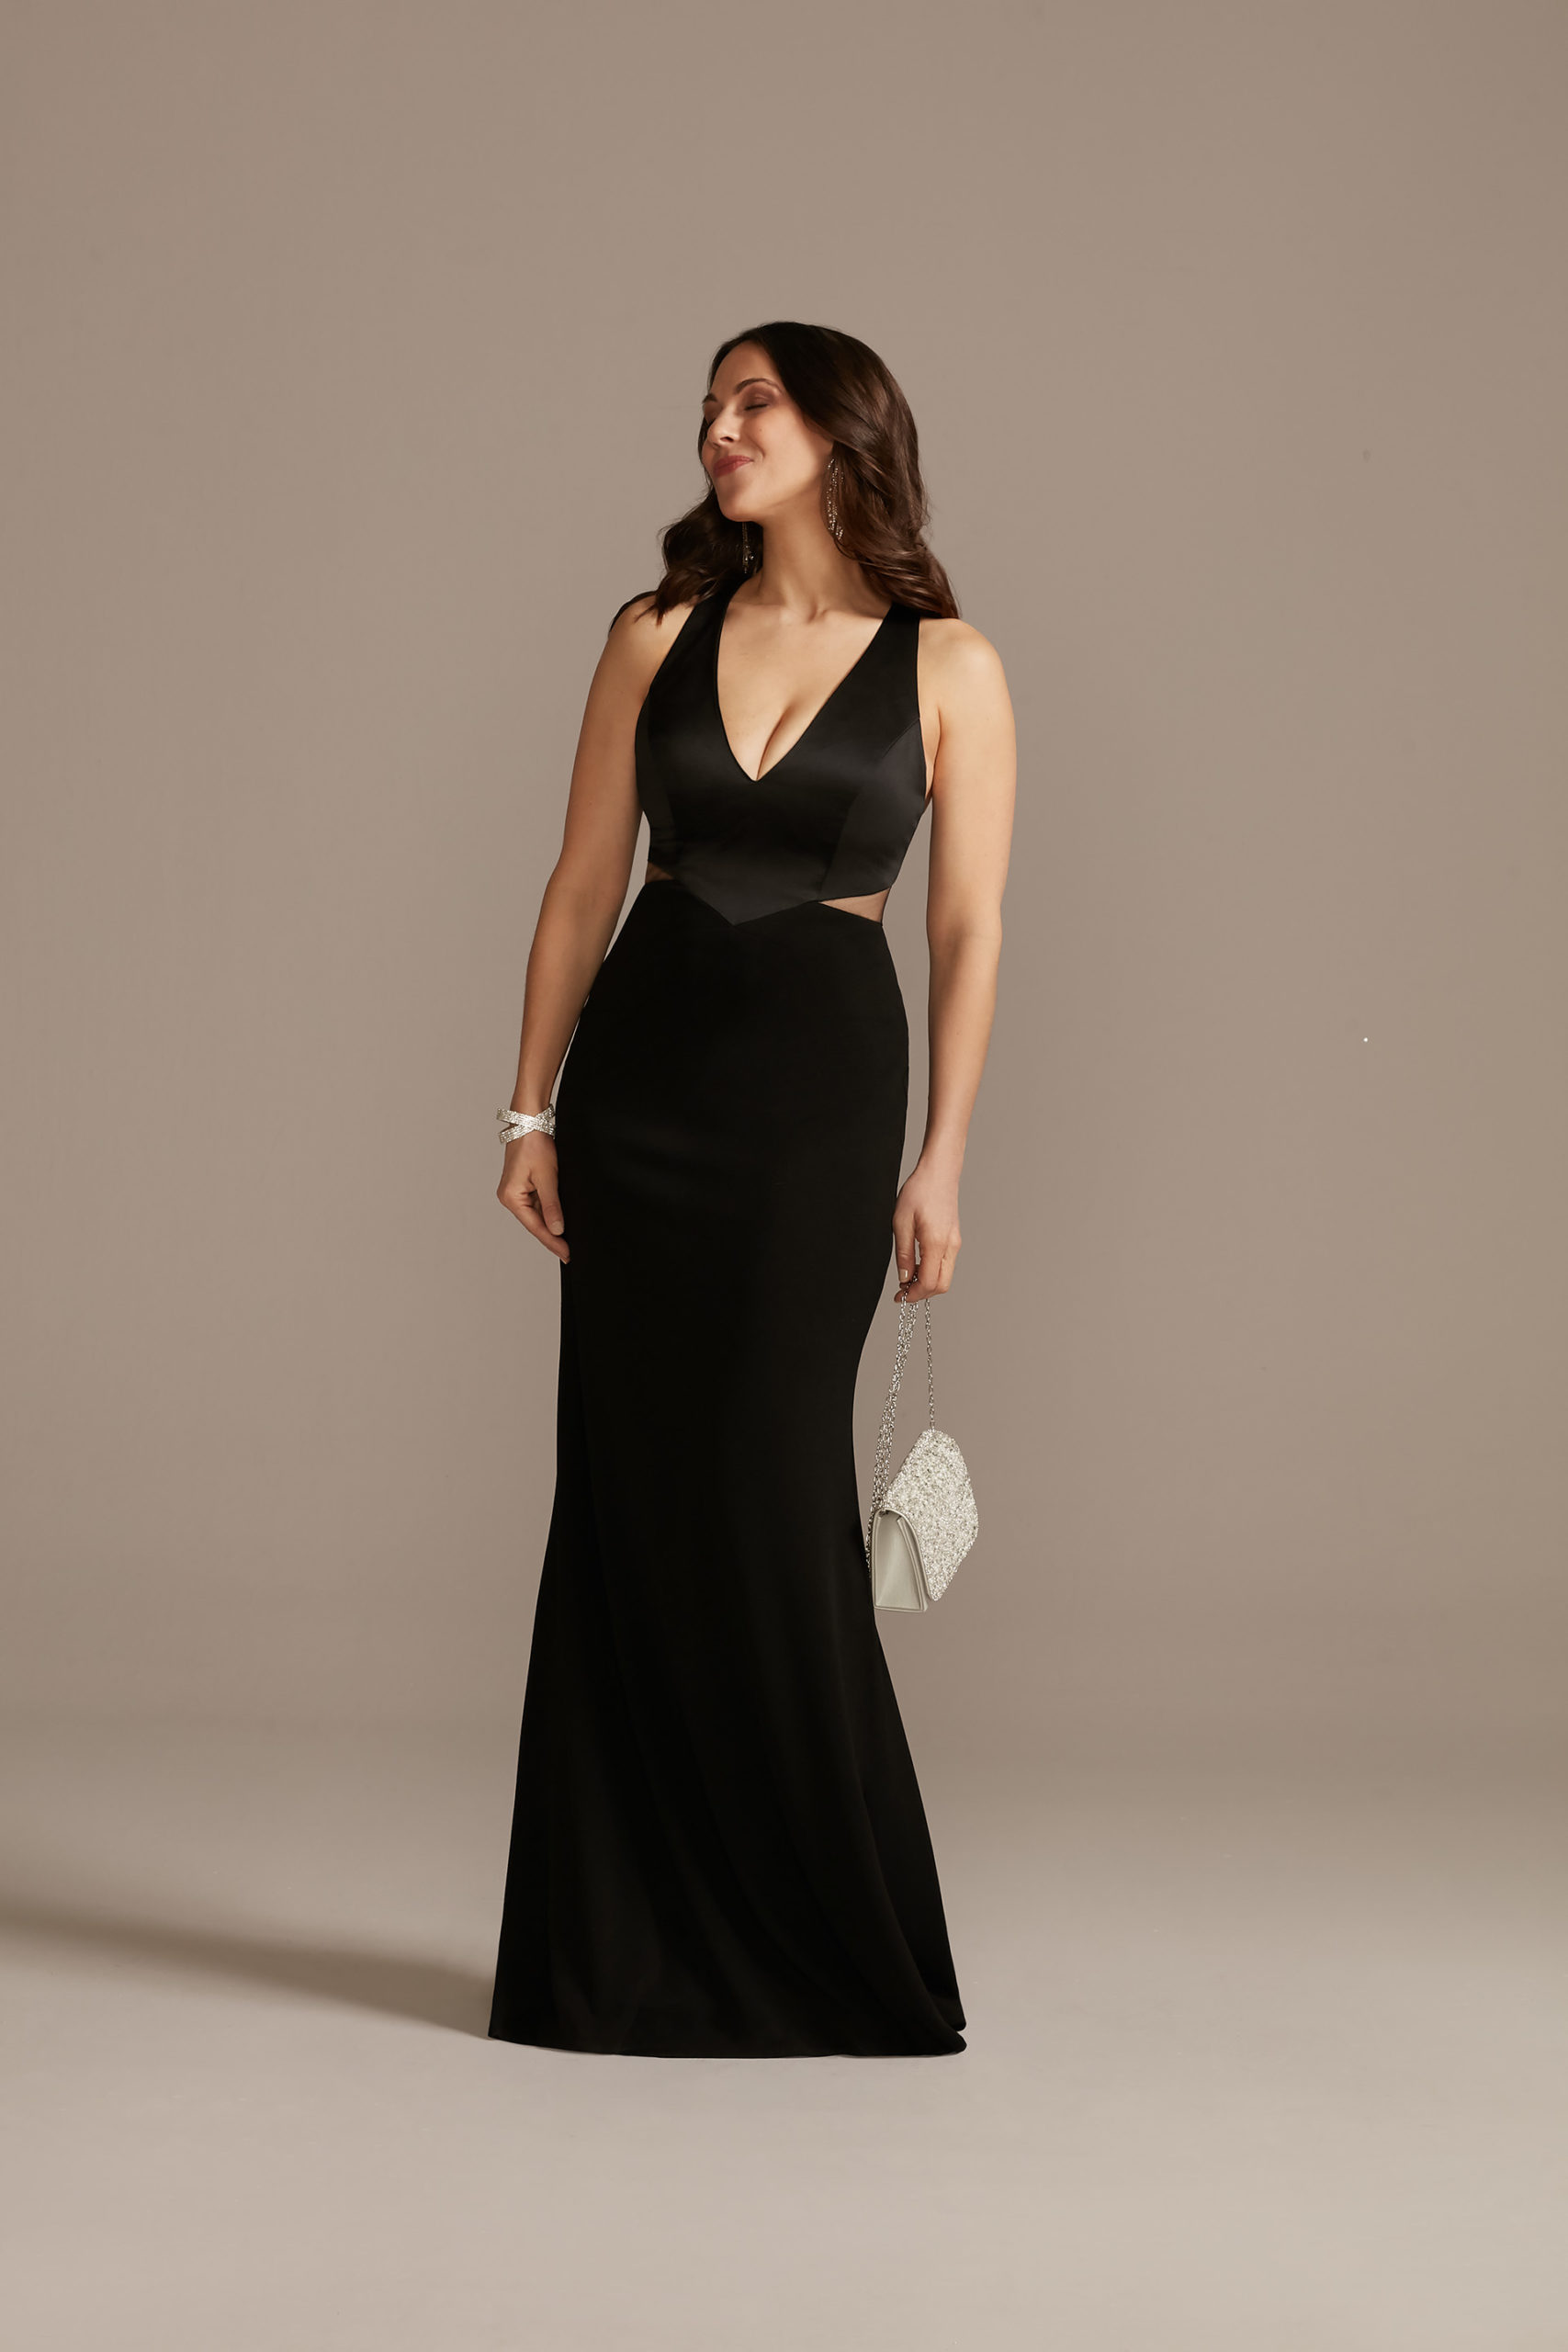 New Years Eve Outfit Inspiration black gown with side cutouts